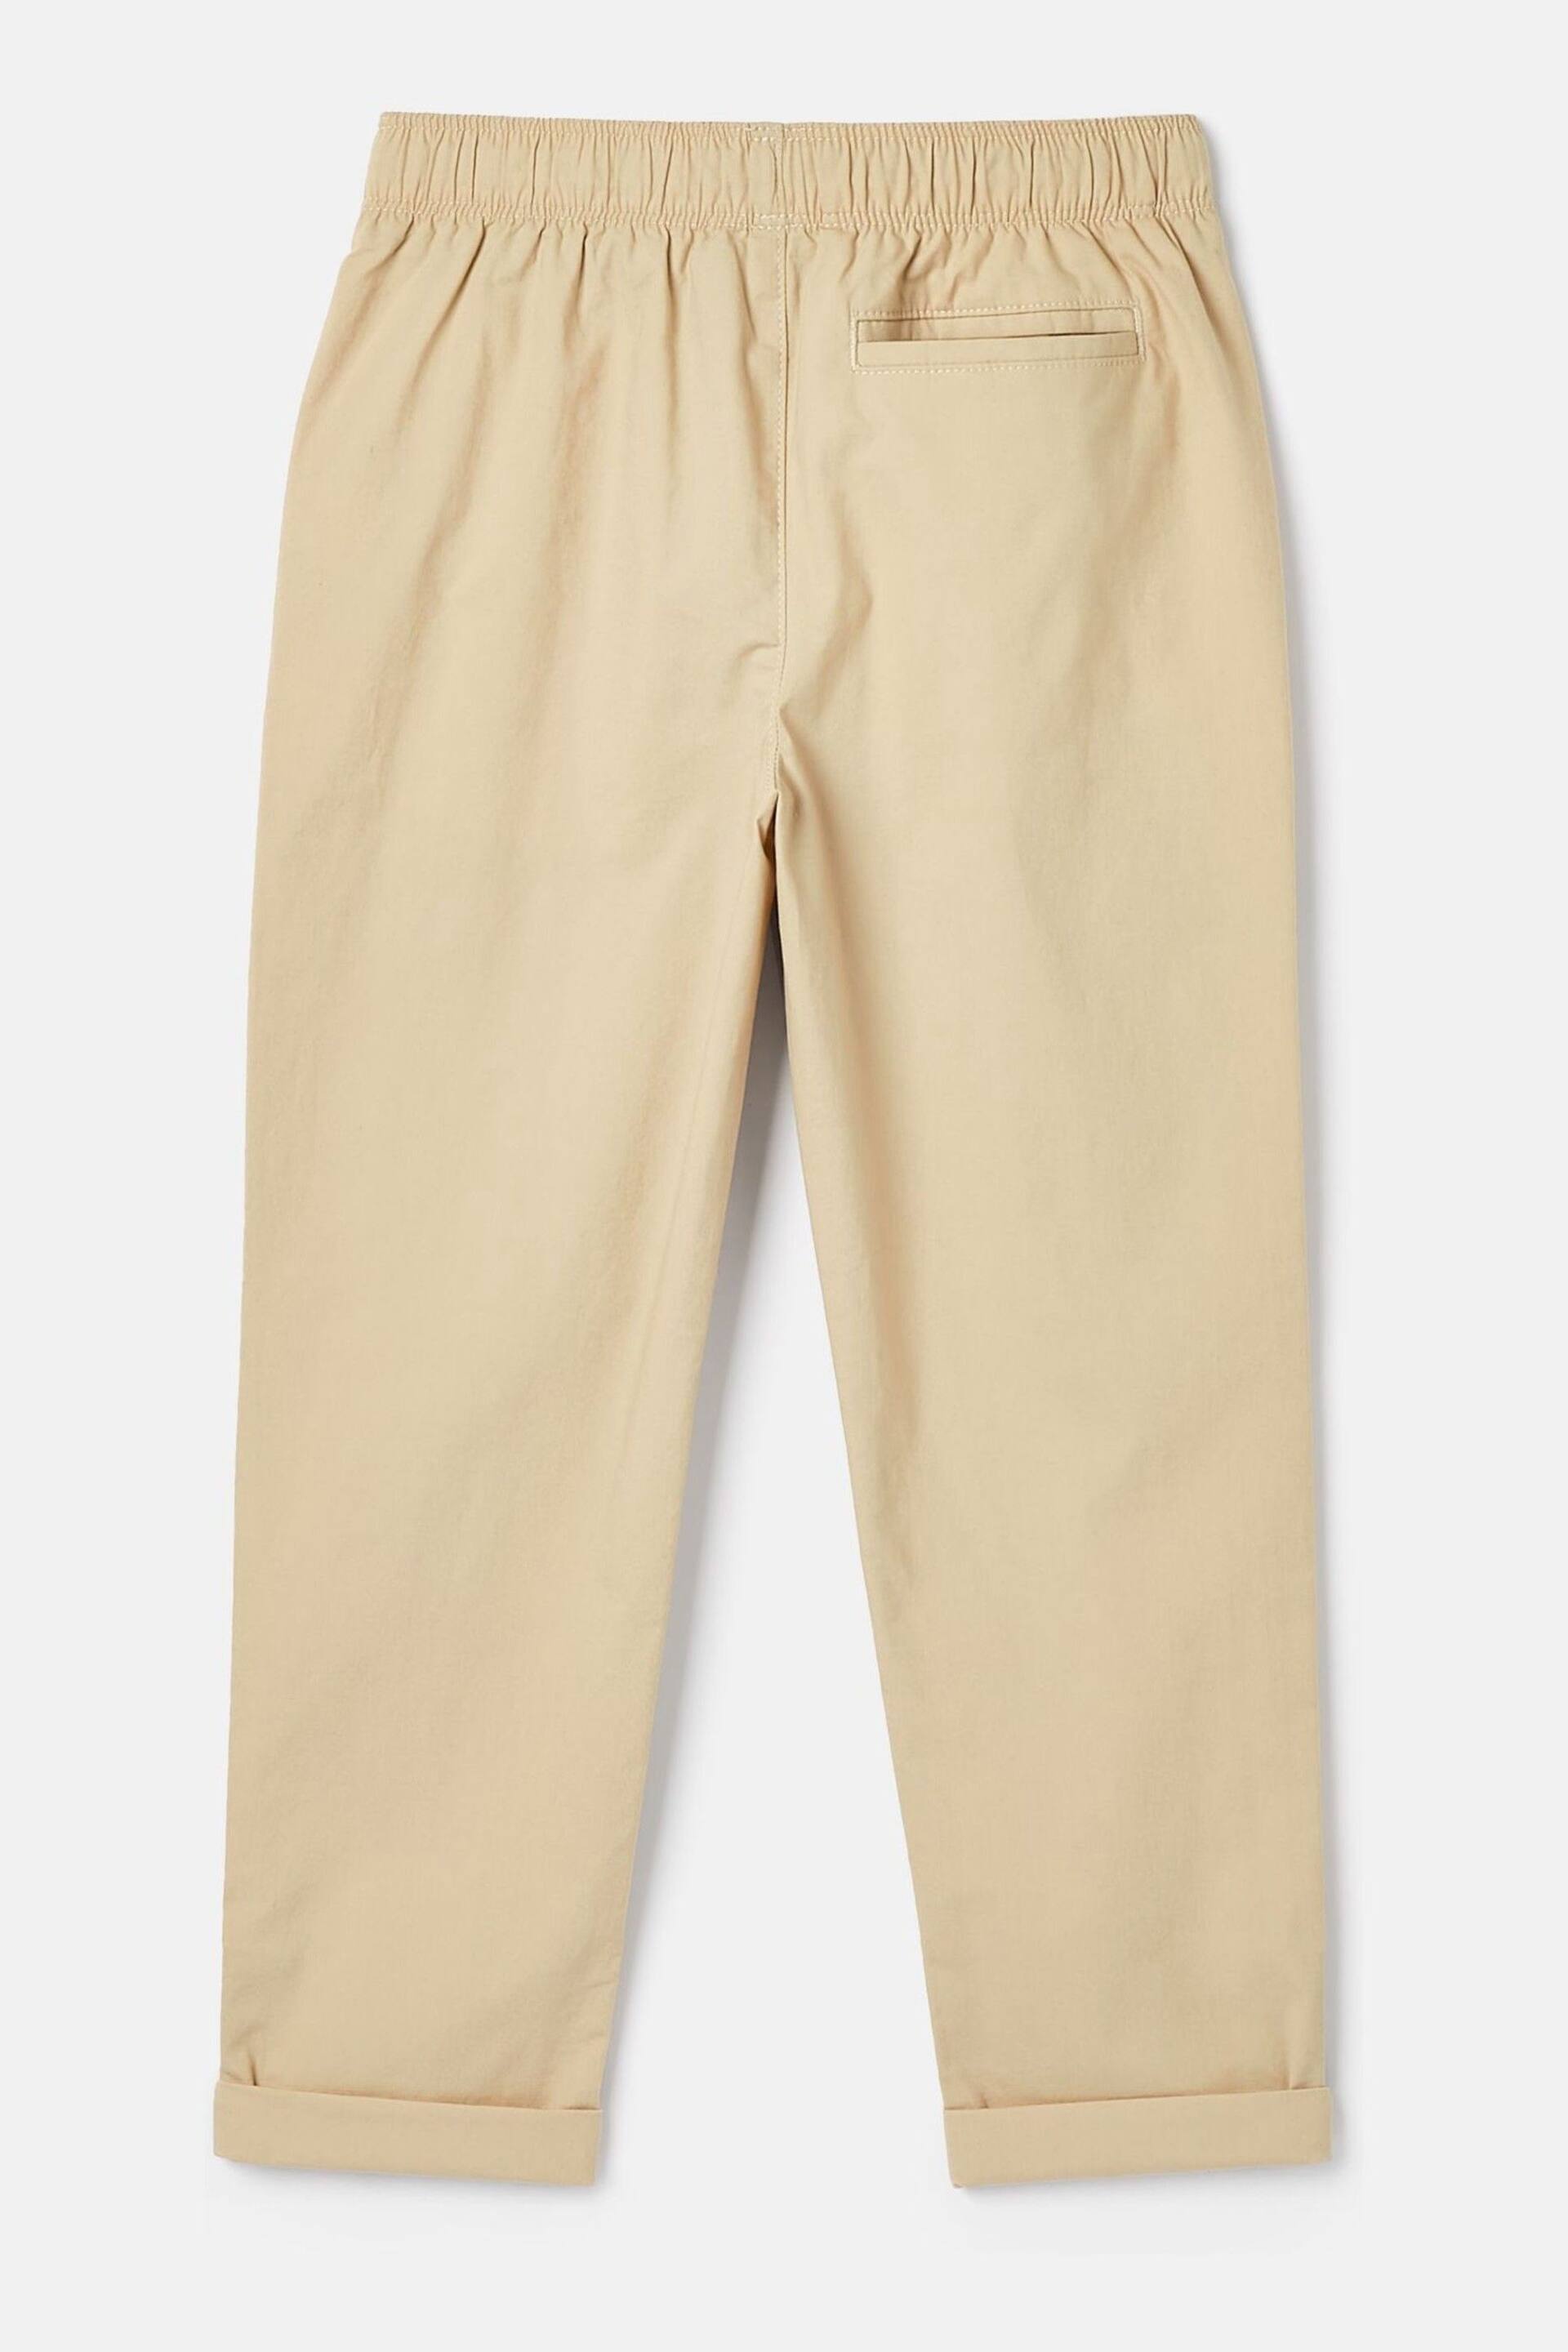 Joules Samson Stone Chino Trousers - Image 6 of 10